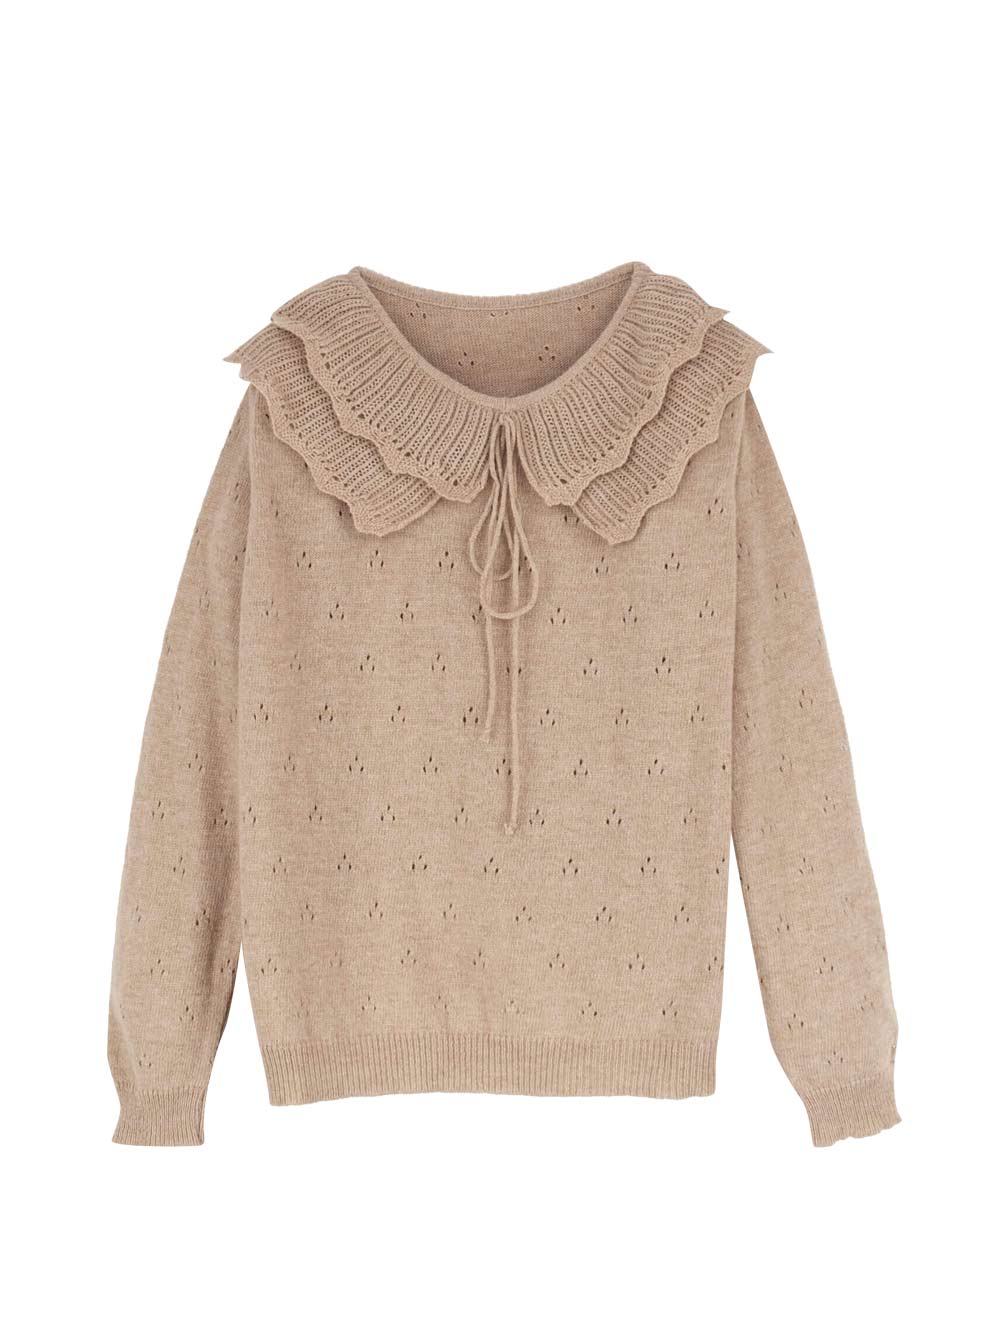 Knit Top with Collar - Beige - Ladies